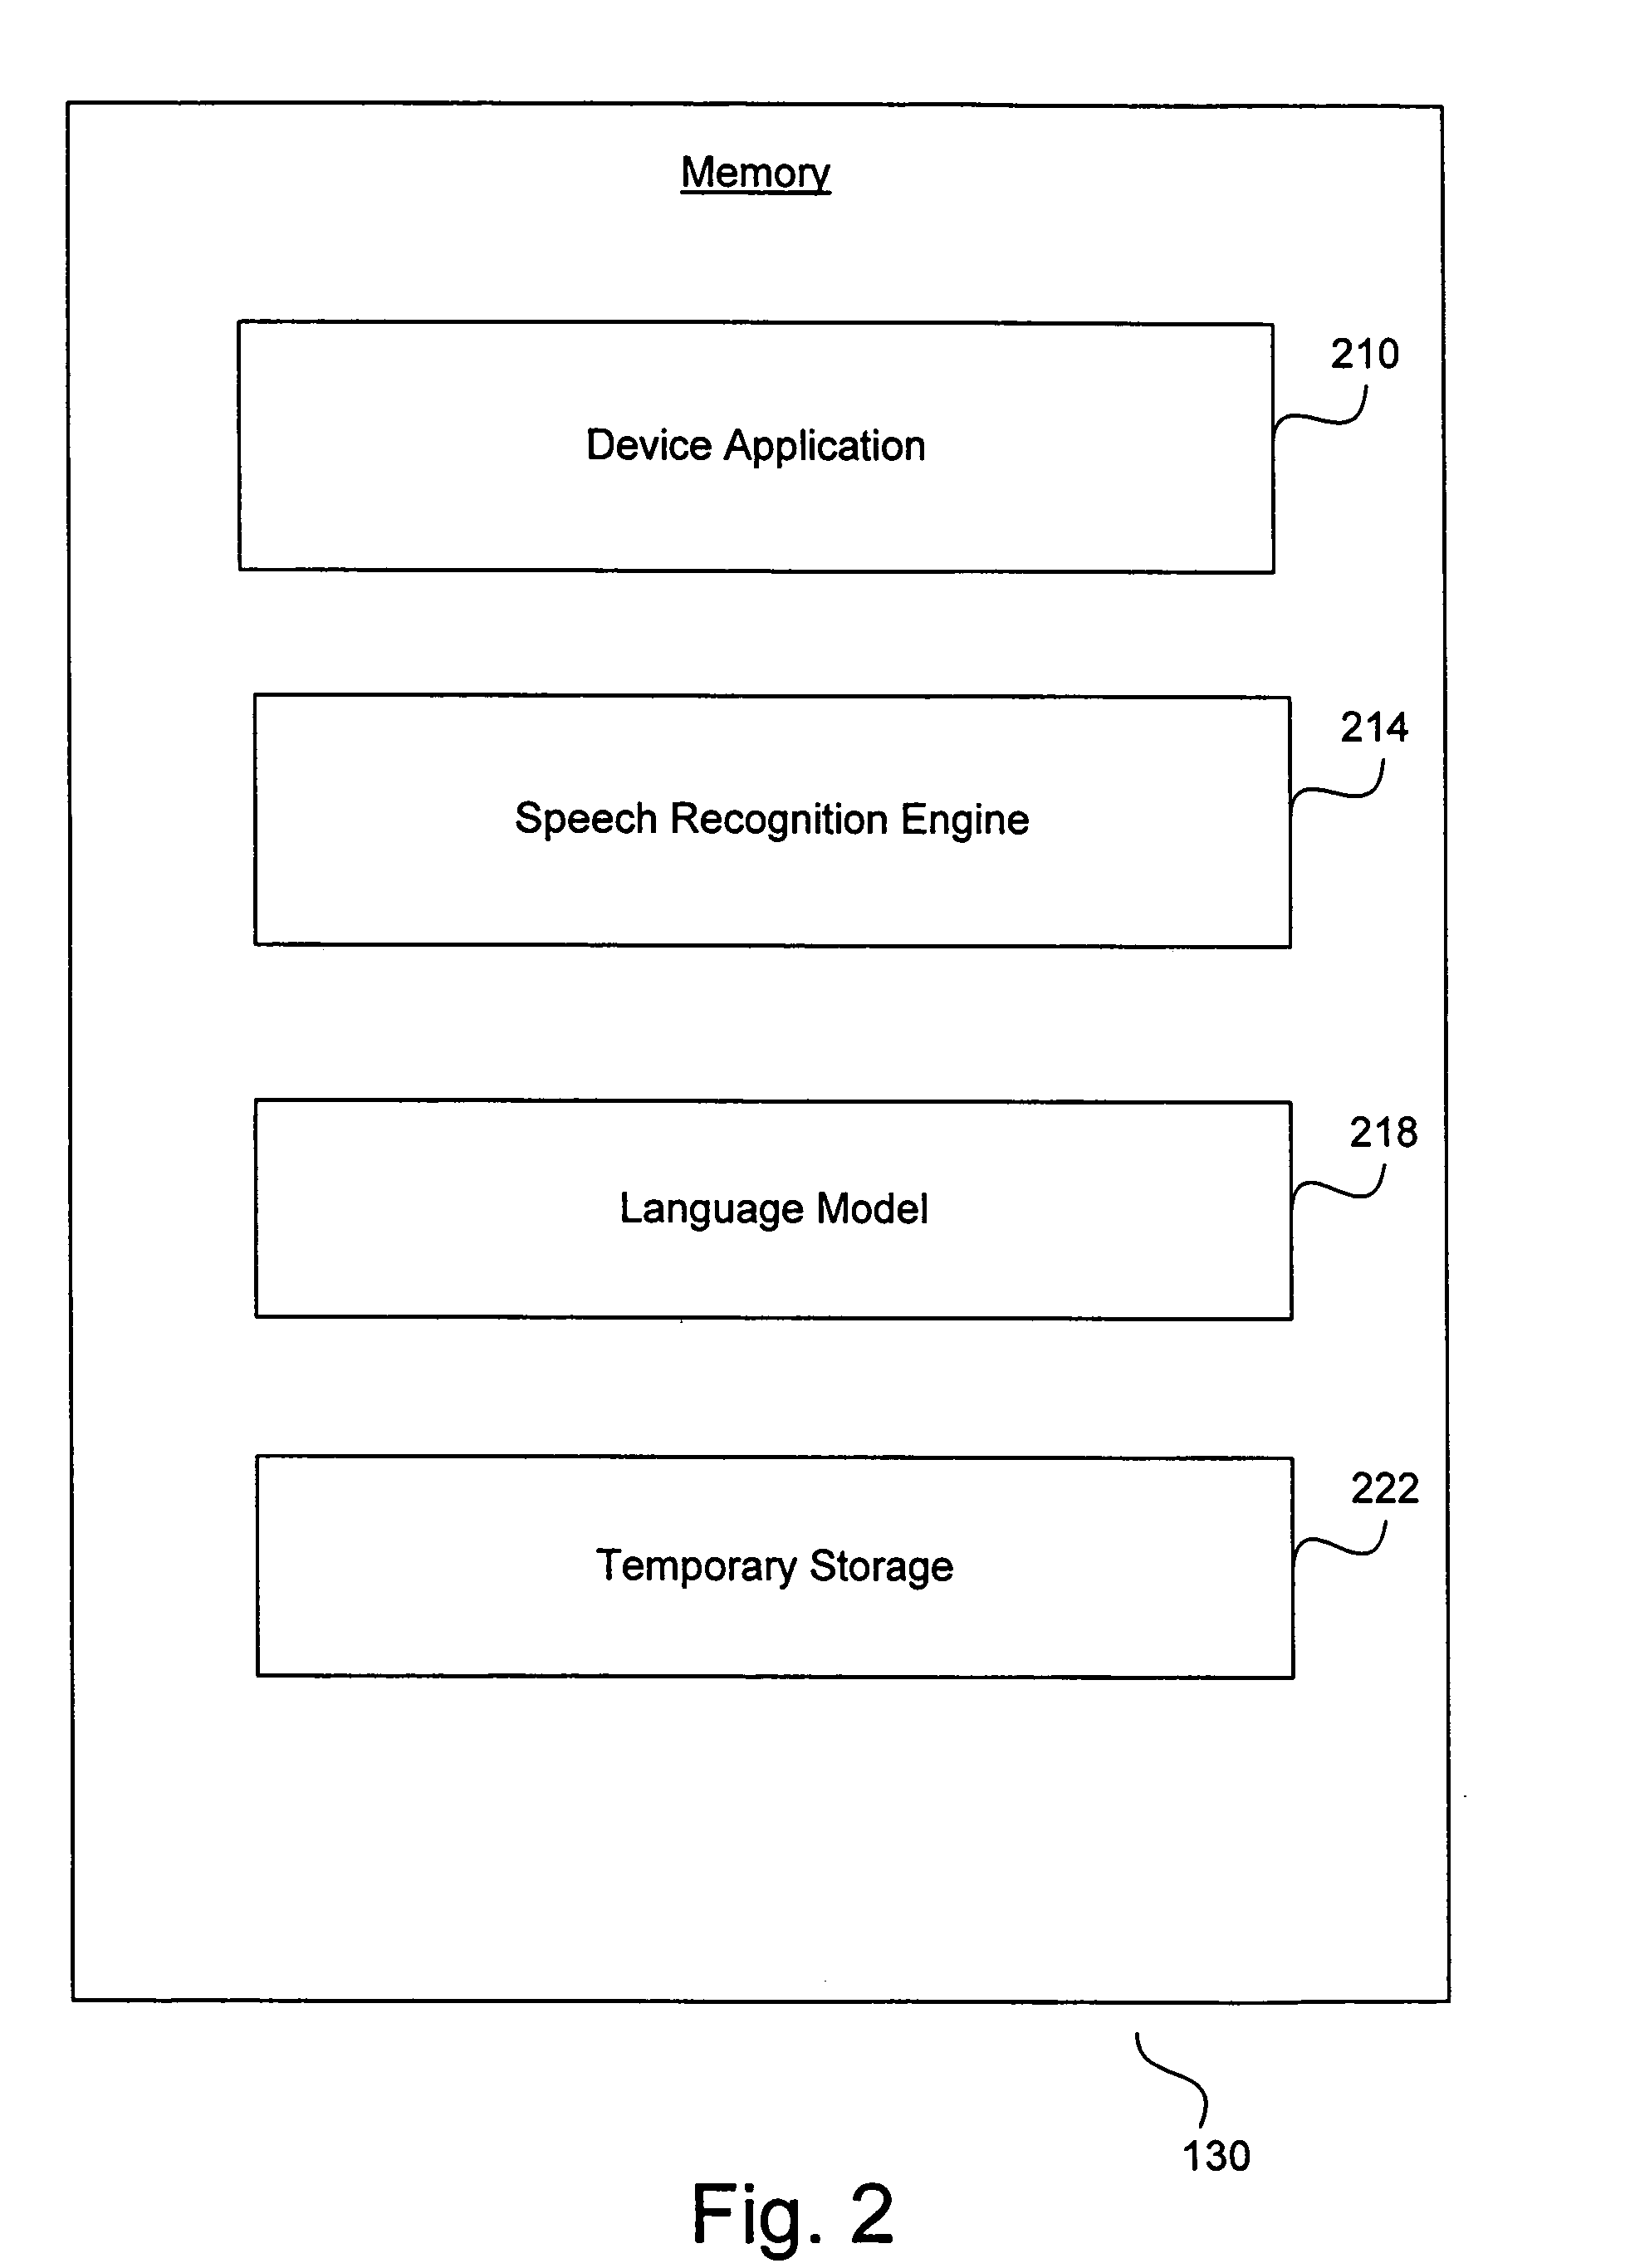 System and method for effectively implementing an optimized language model for speech recognition